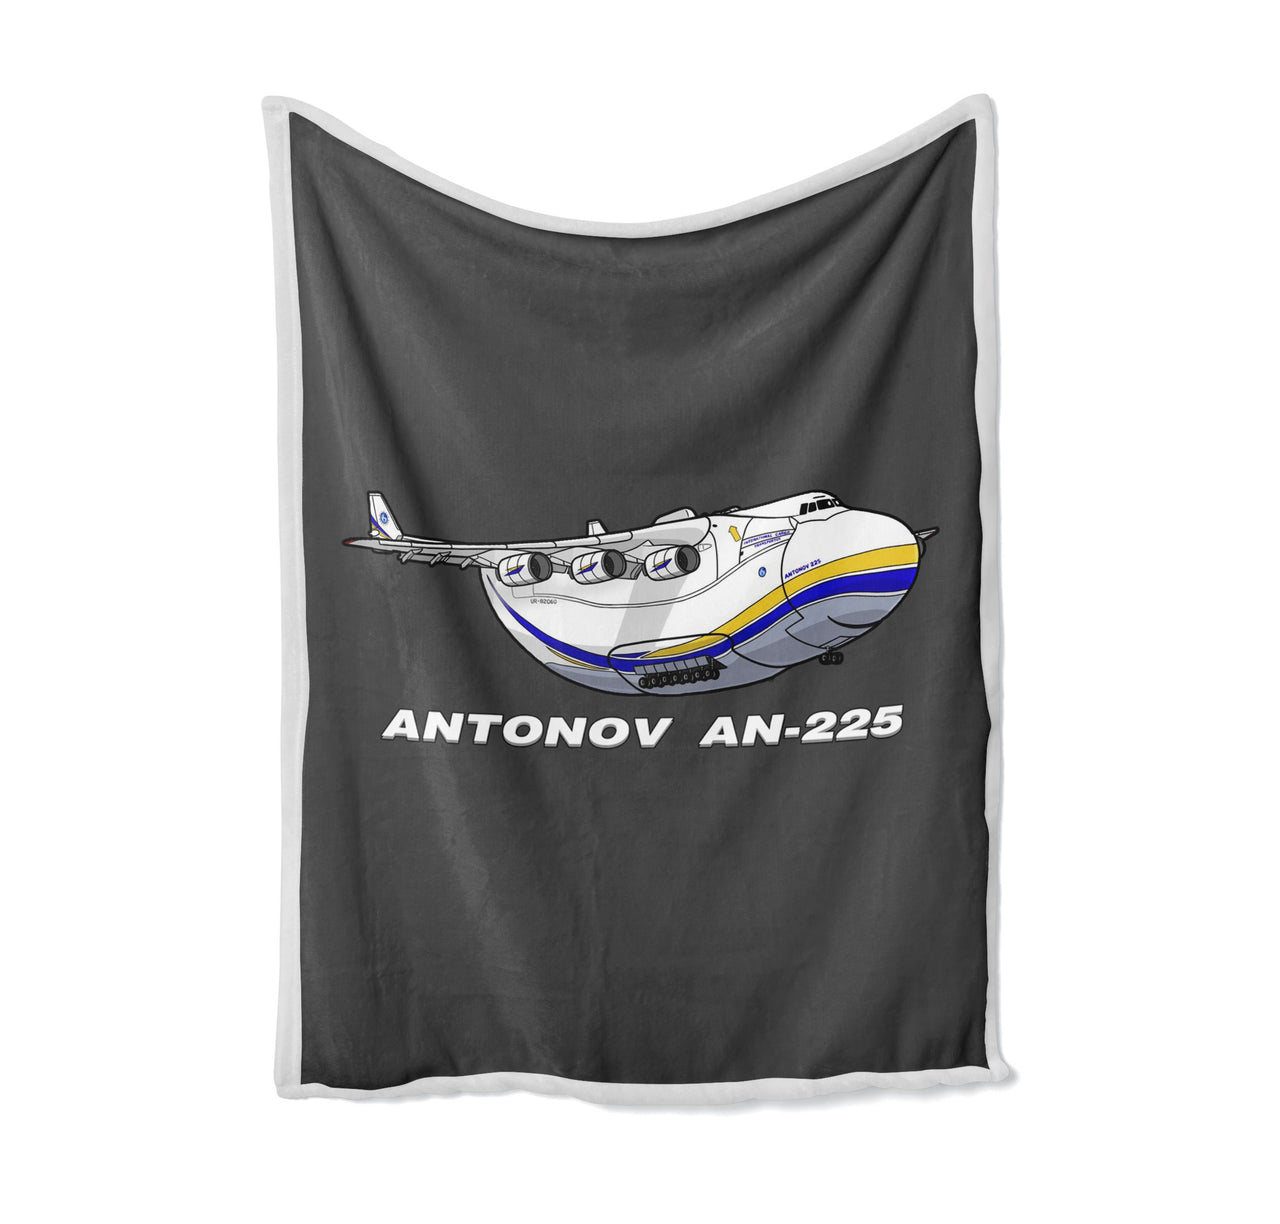 Antonov AN-225 (17) Designed Bed Blankets & Covers